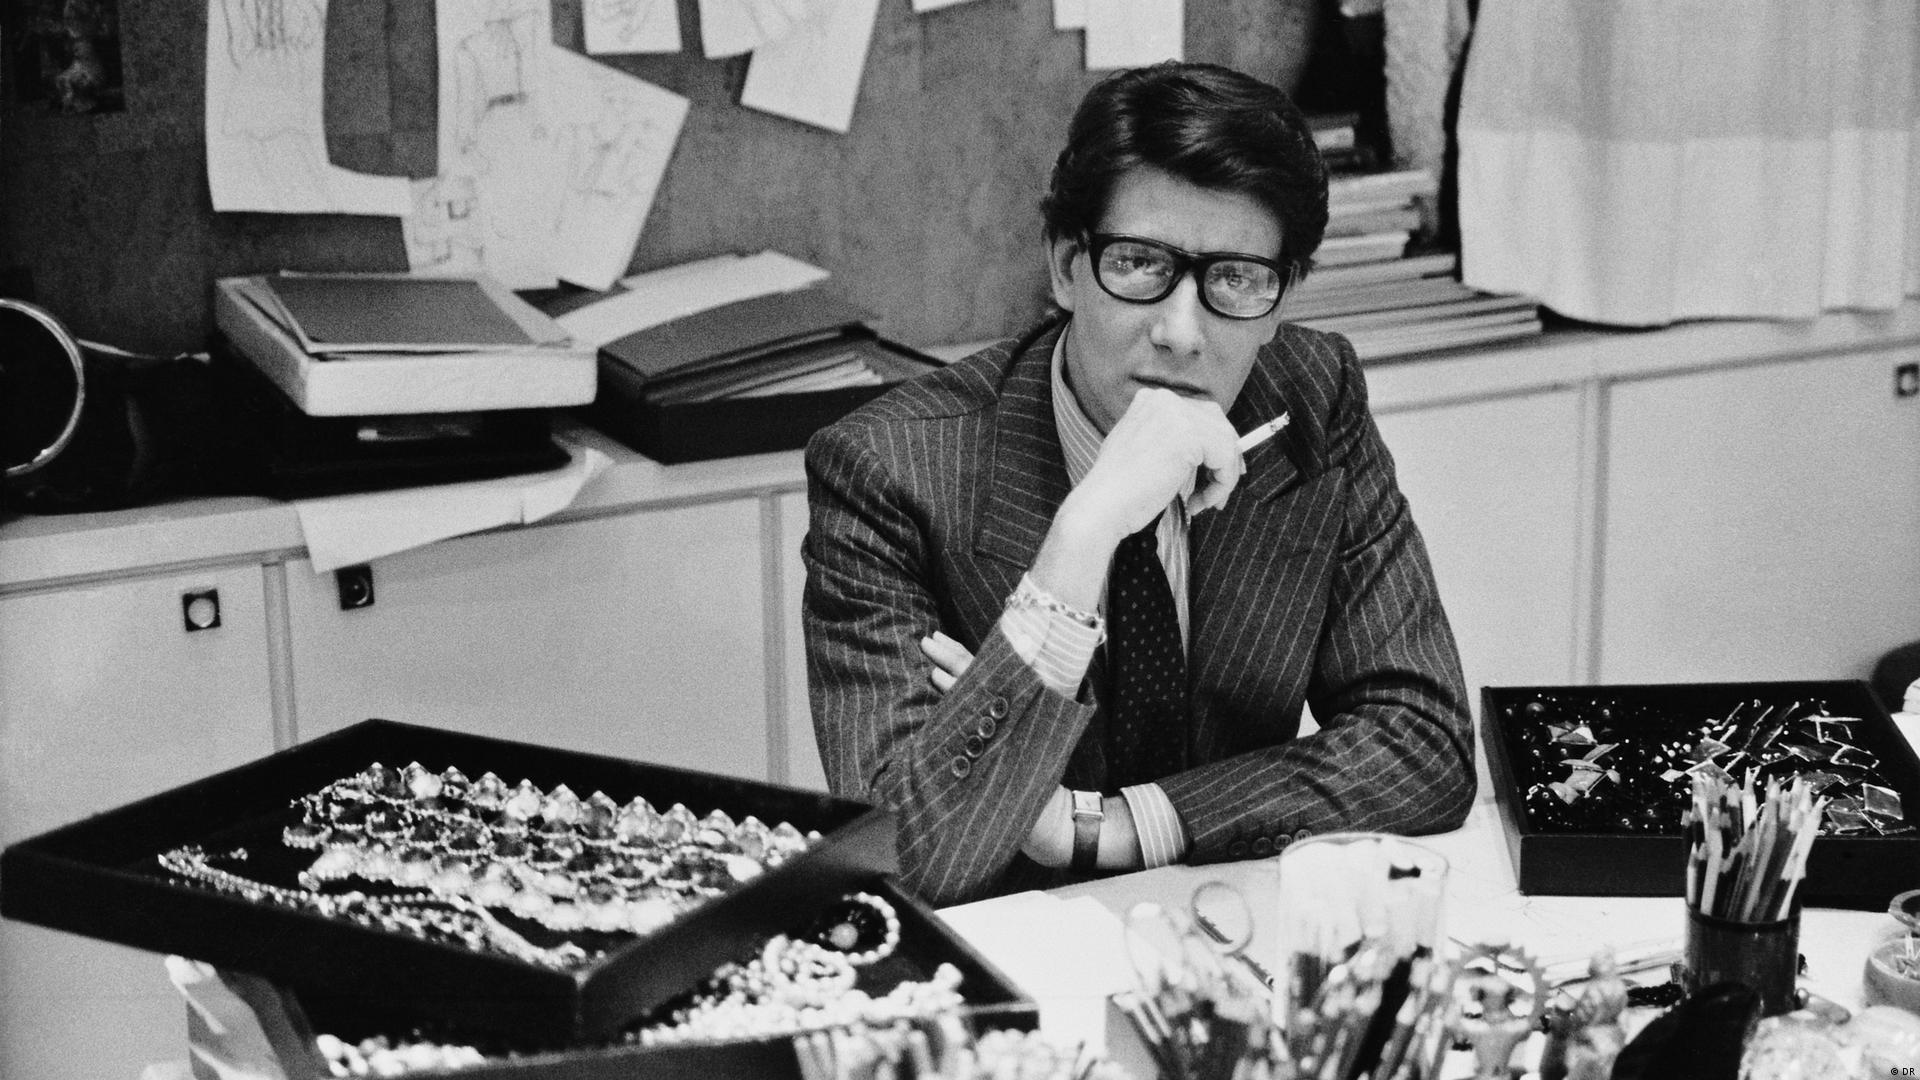 Yves Saint Laurent: A French Fashion History